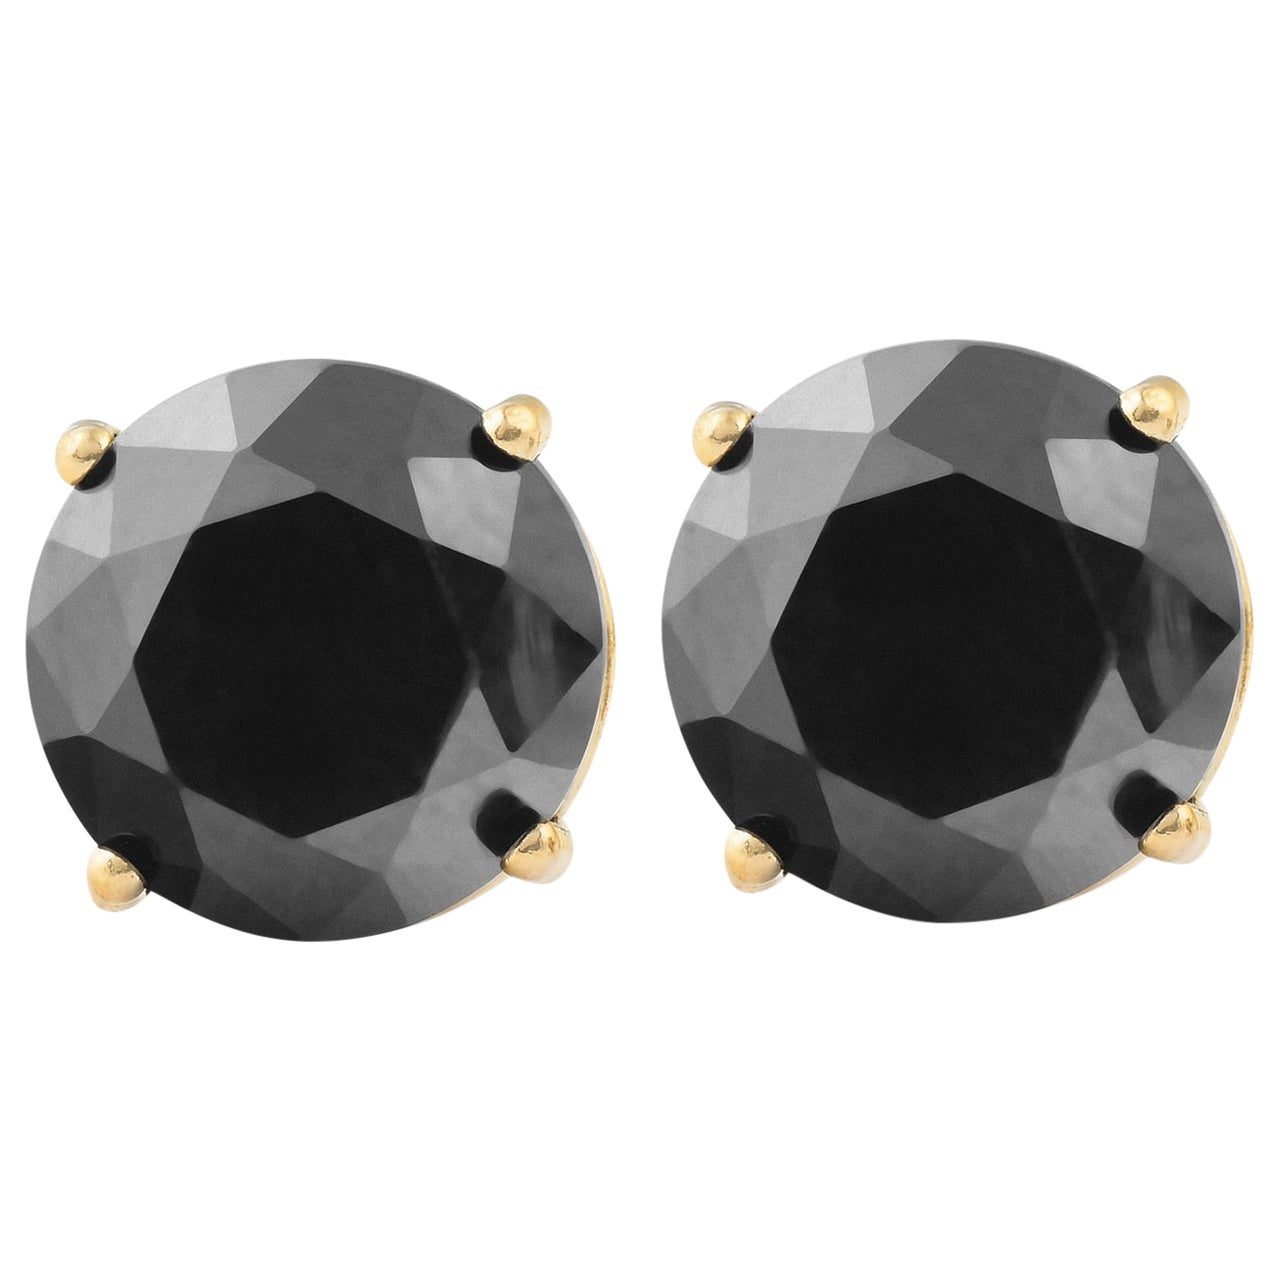 3.84 Carat Total Round Black Diamond Solitaire Stud Earrings in 14 K Yellow Gold